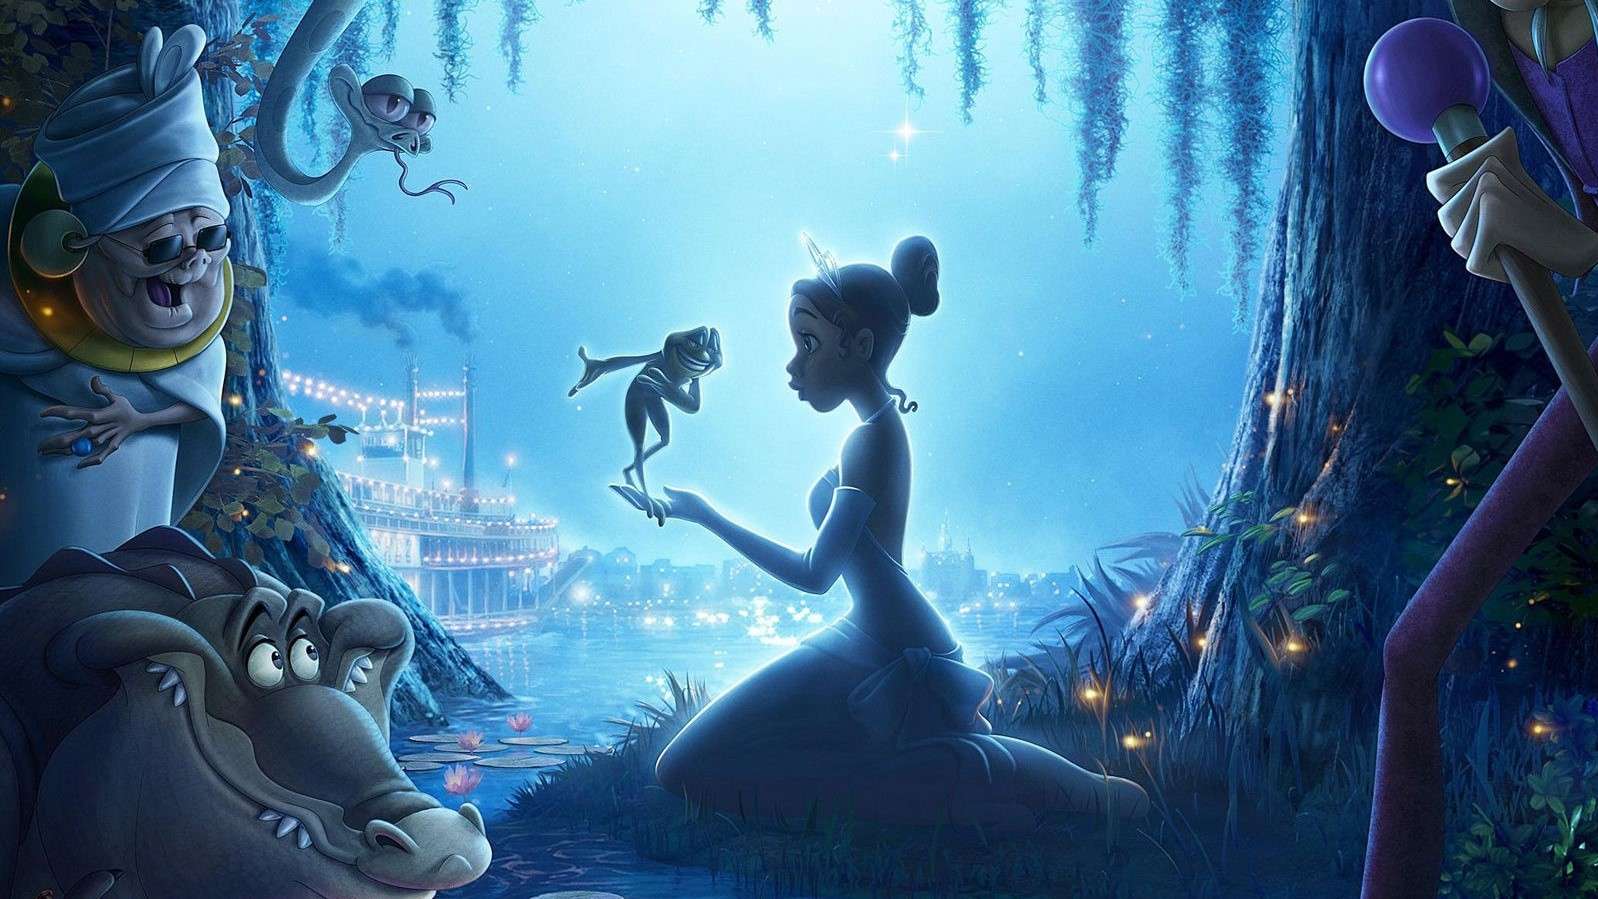 After The Little Mermaid, the Princess and the Frog are Disney’s new ‘victims’